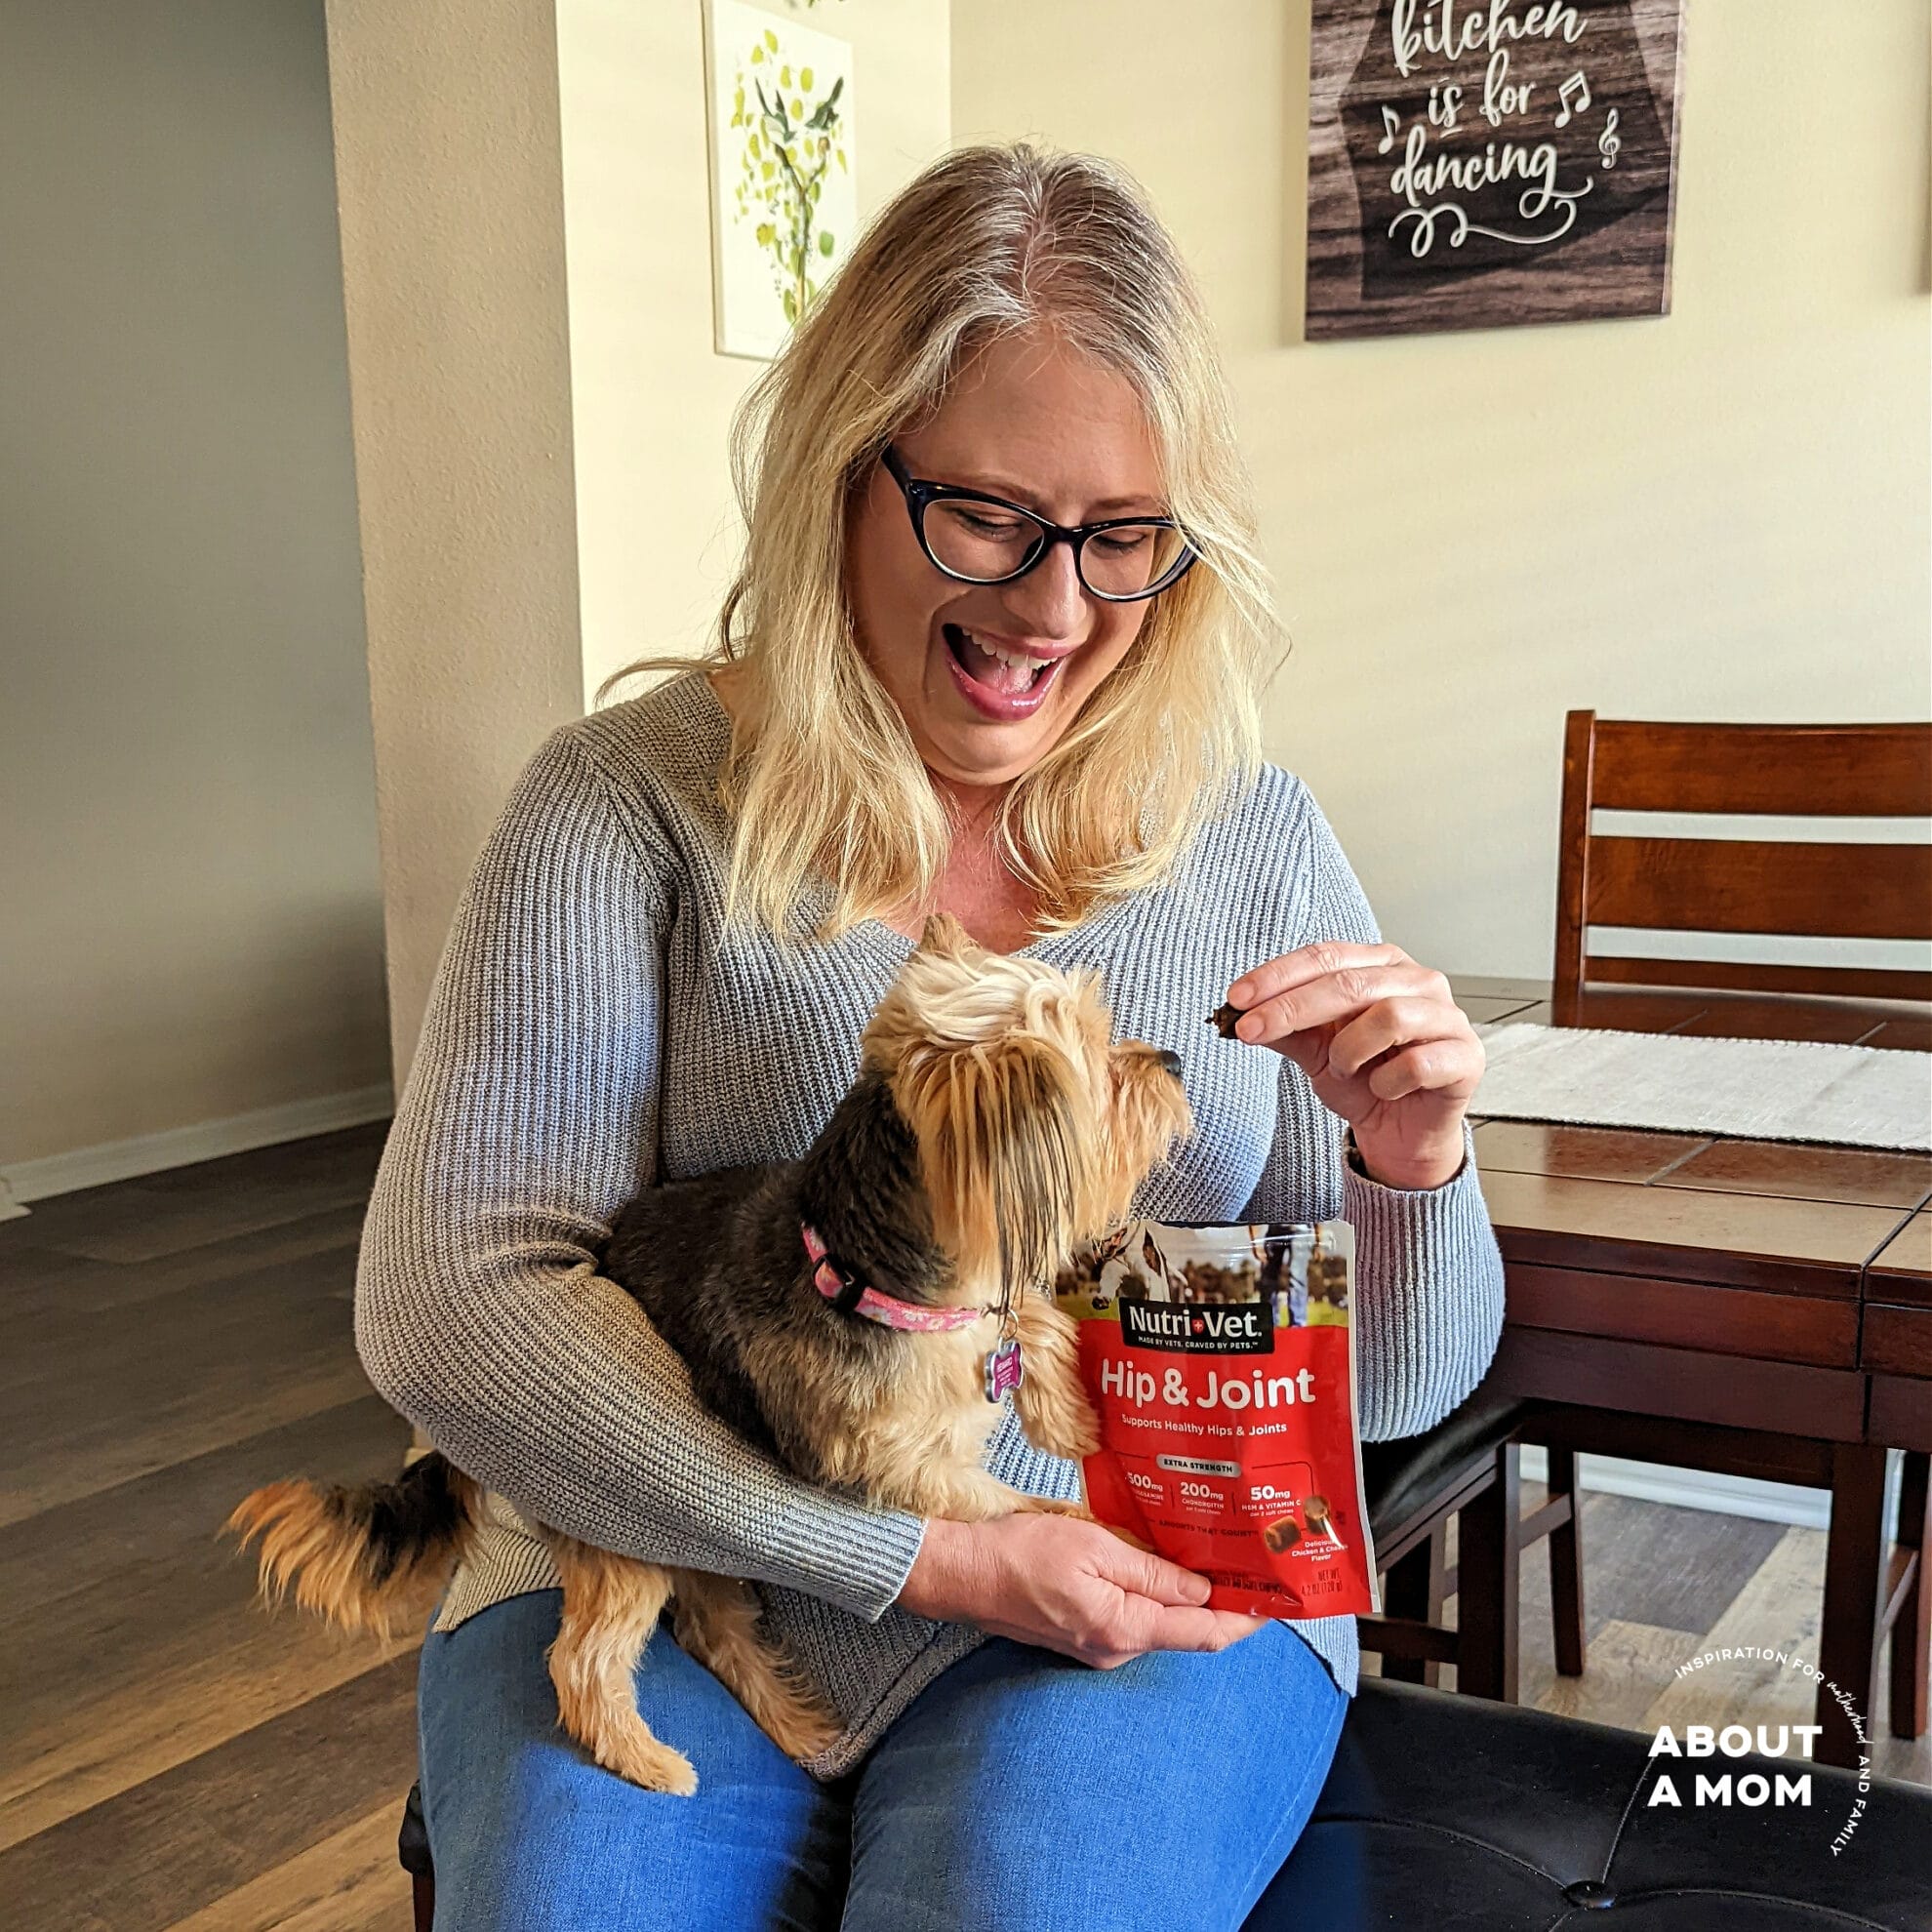 There's nothing like the unconditional love you get from a family pet. Your dog deserves the very best dog wellness products from Nutri-Vet and Vet's Best.